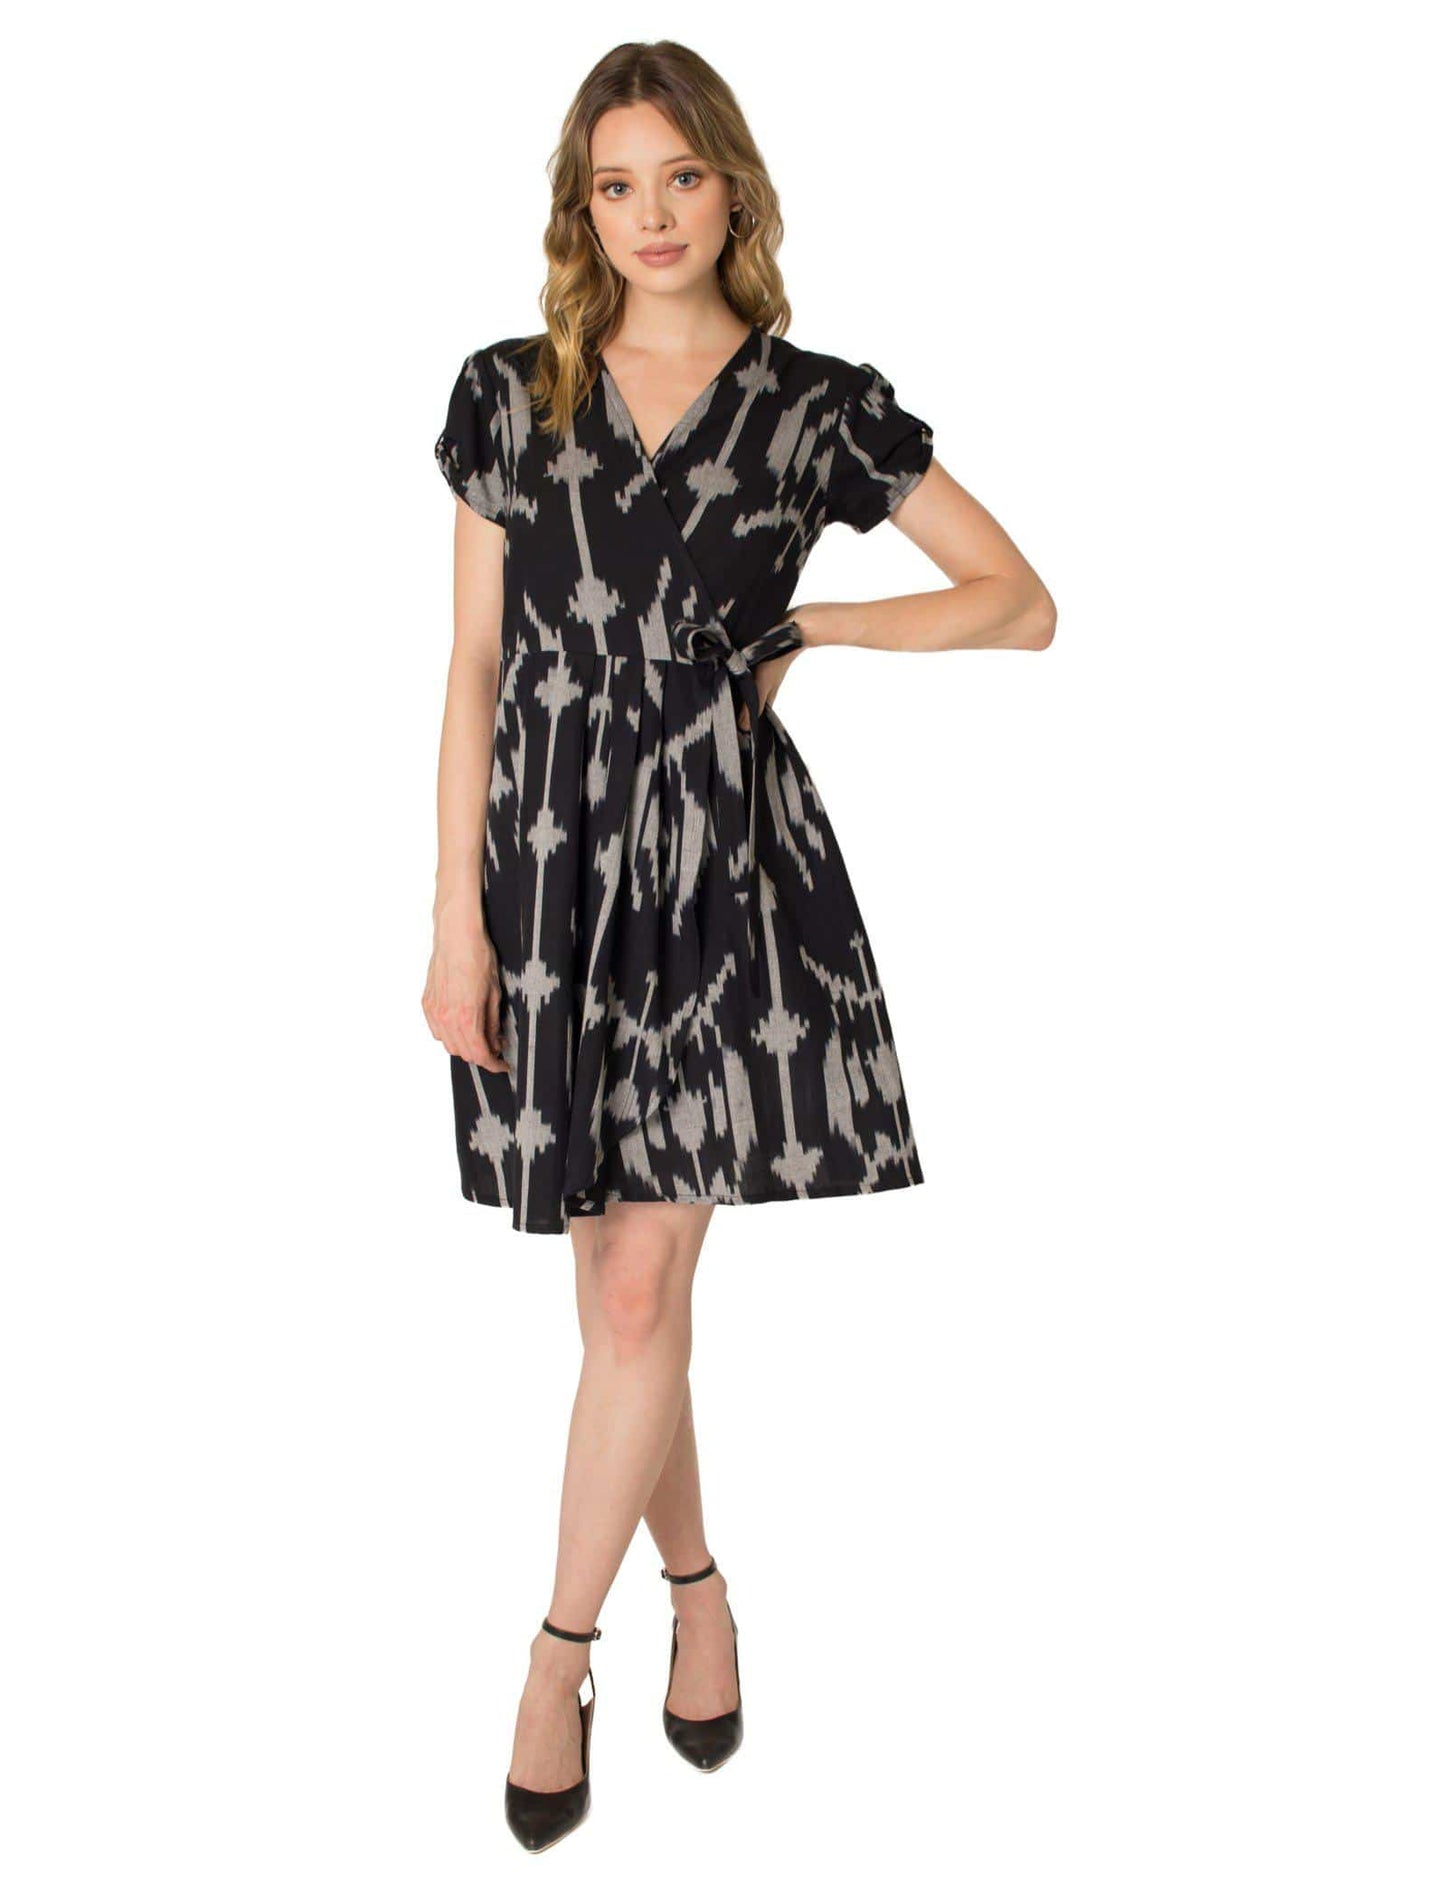 Odin Wrap Dress - Passion Lilie - Fair Trade - Sustainable Fashion